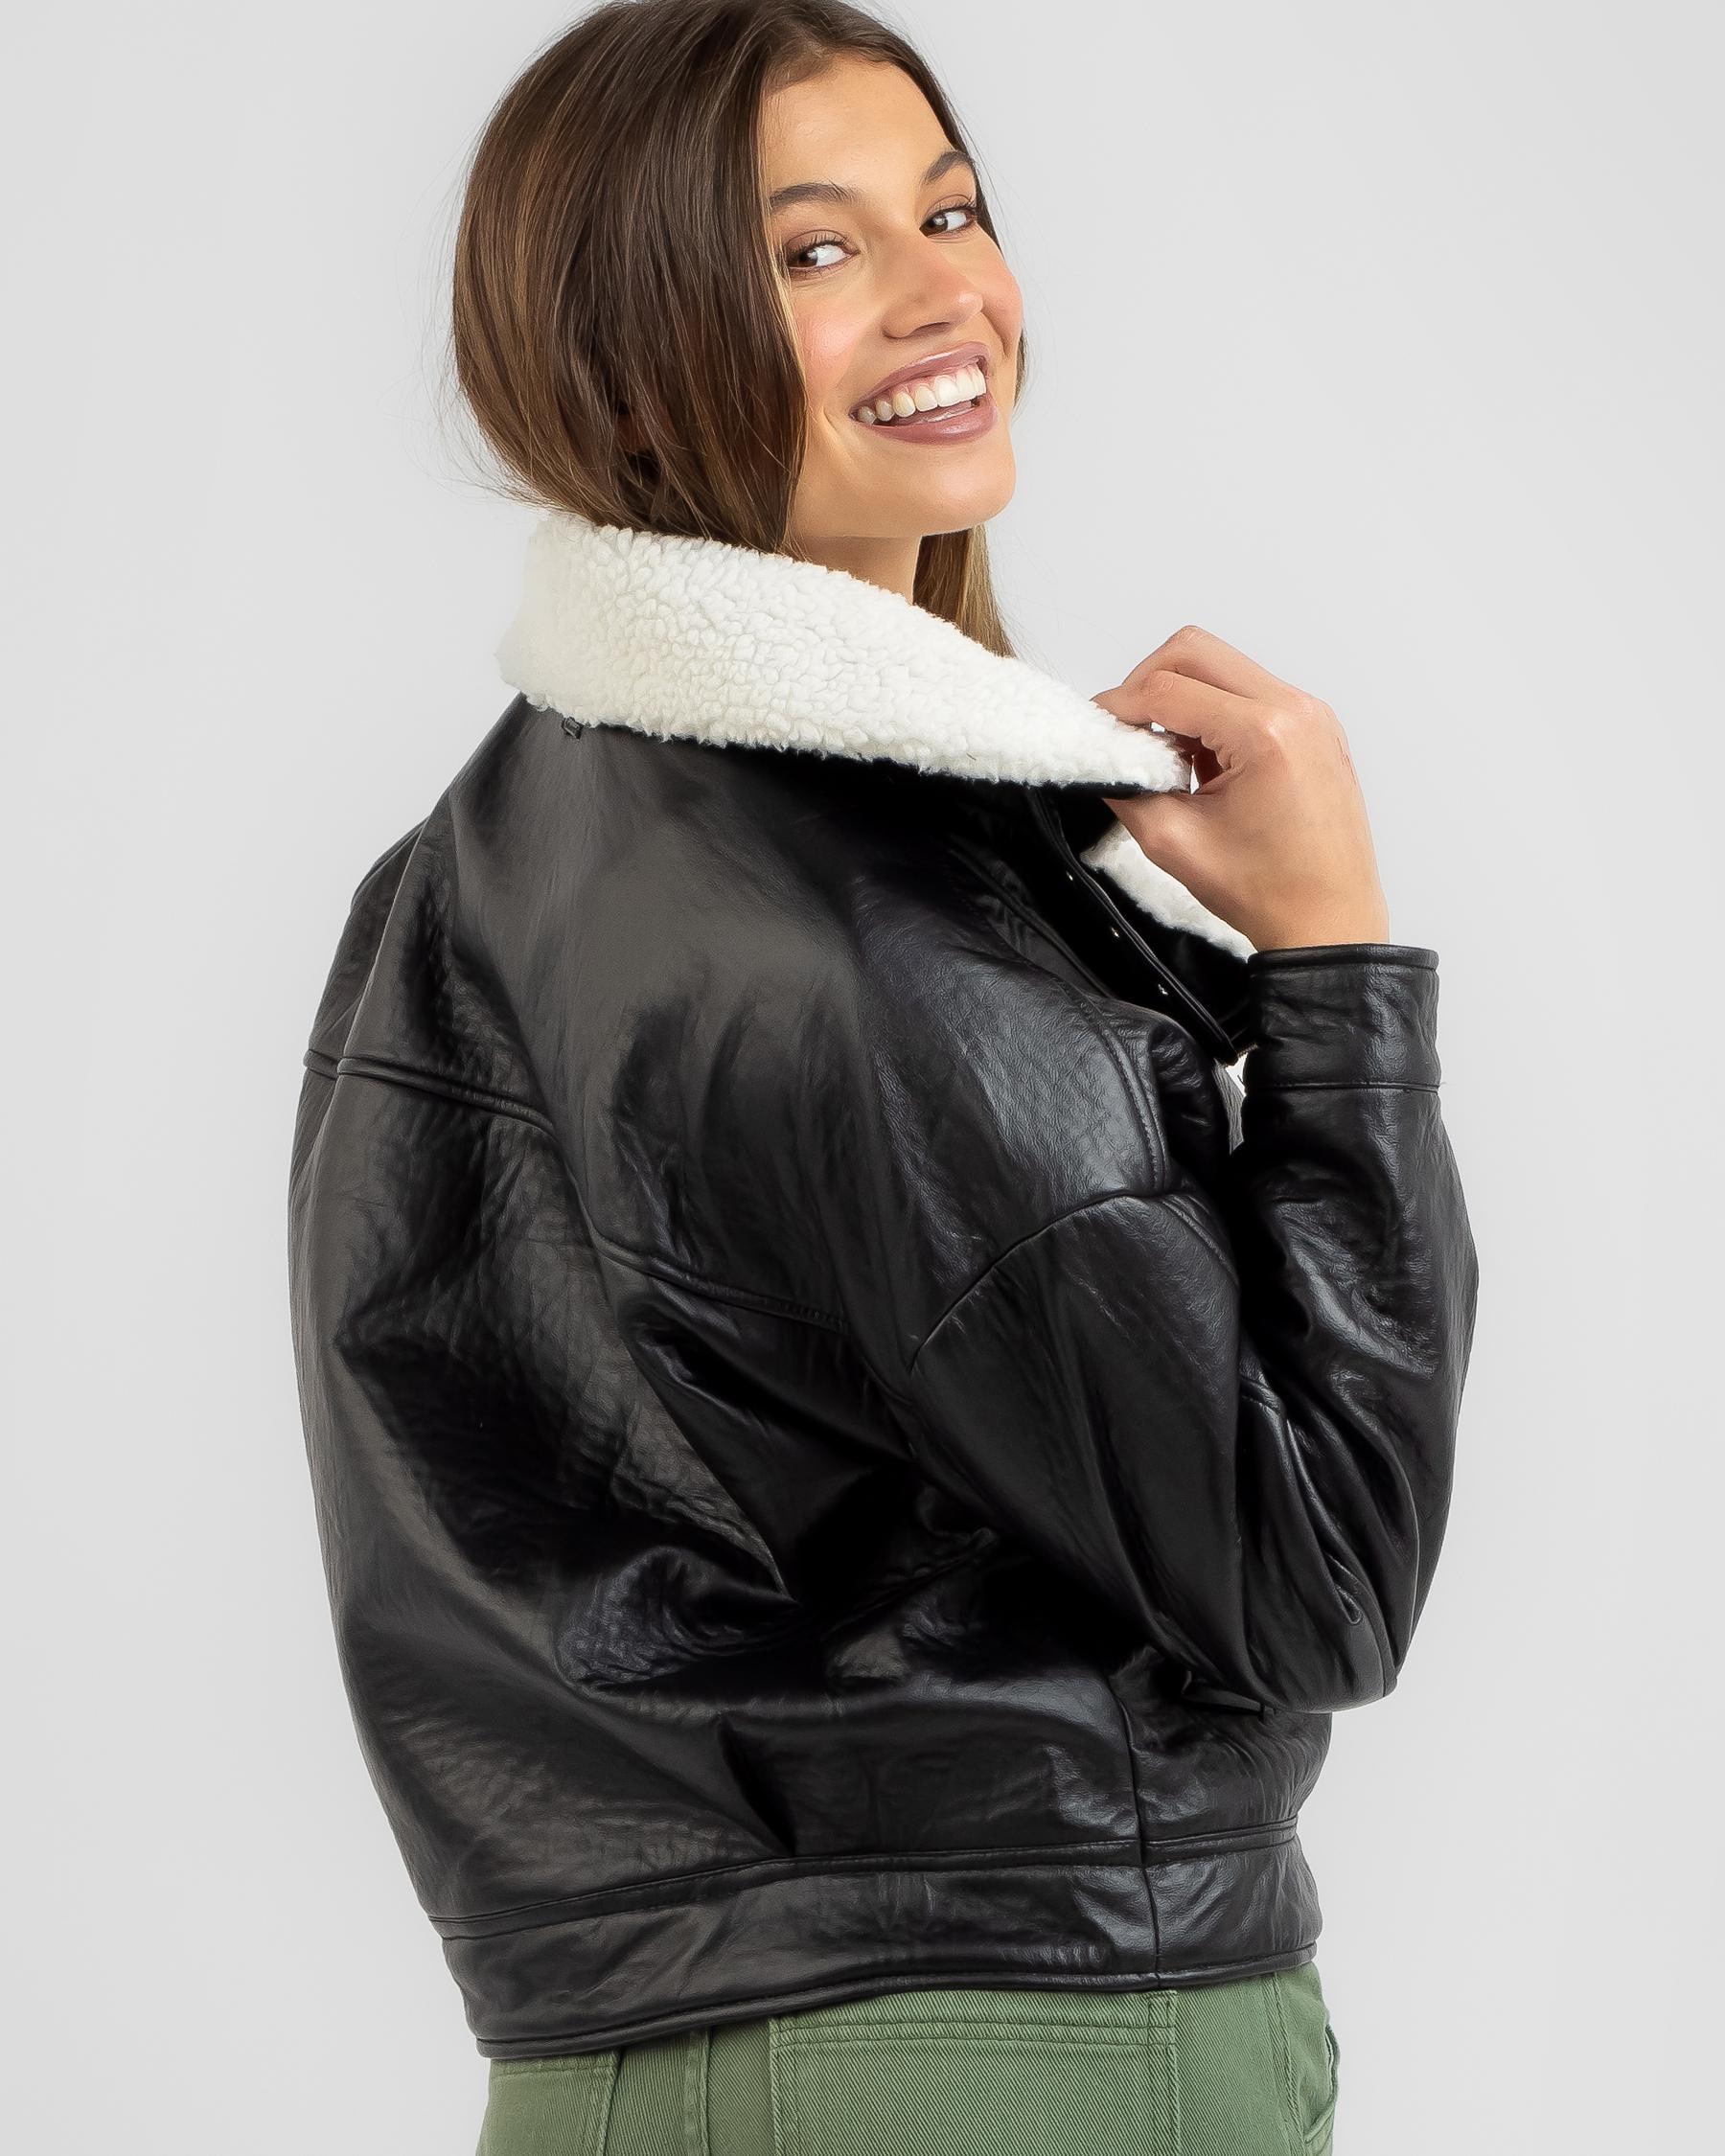 Ava And Ever Frenchy Jacket In Black/cream - Fast Shipping & Easy ...